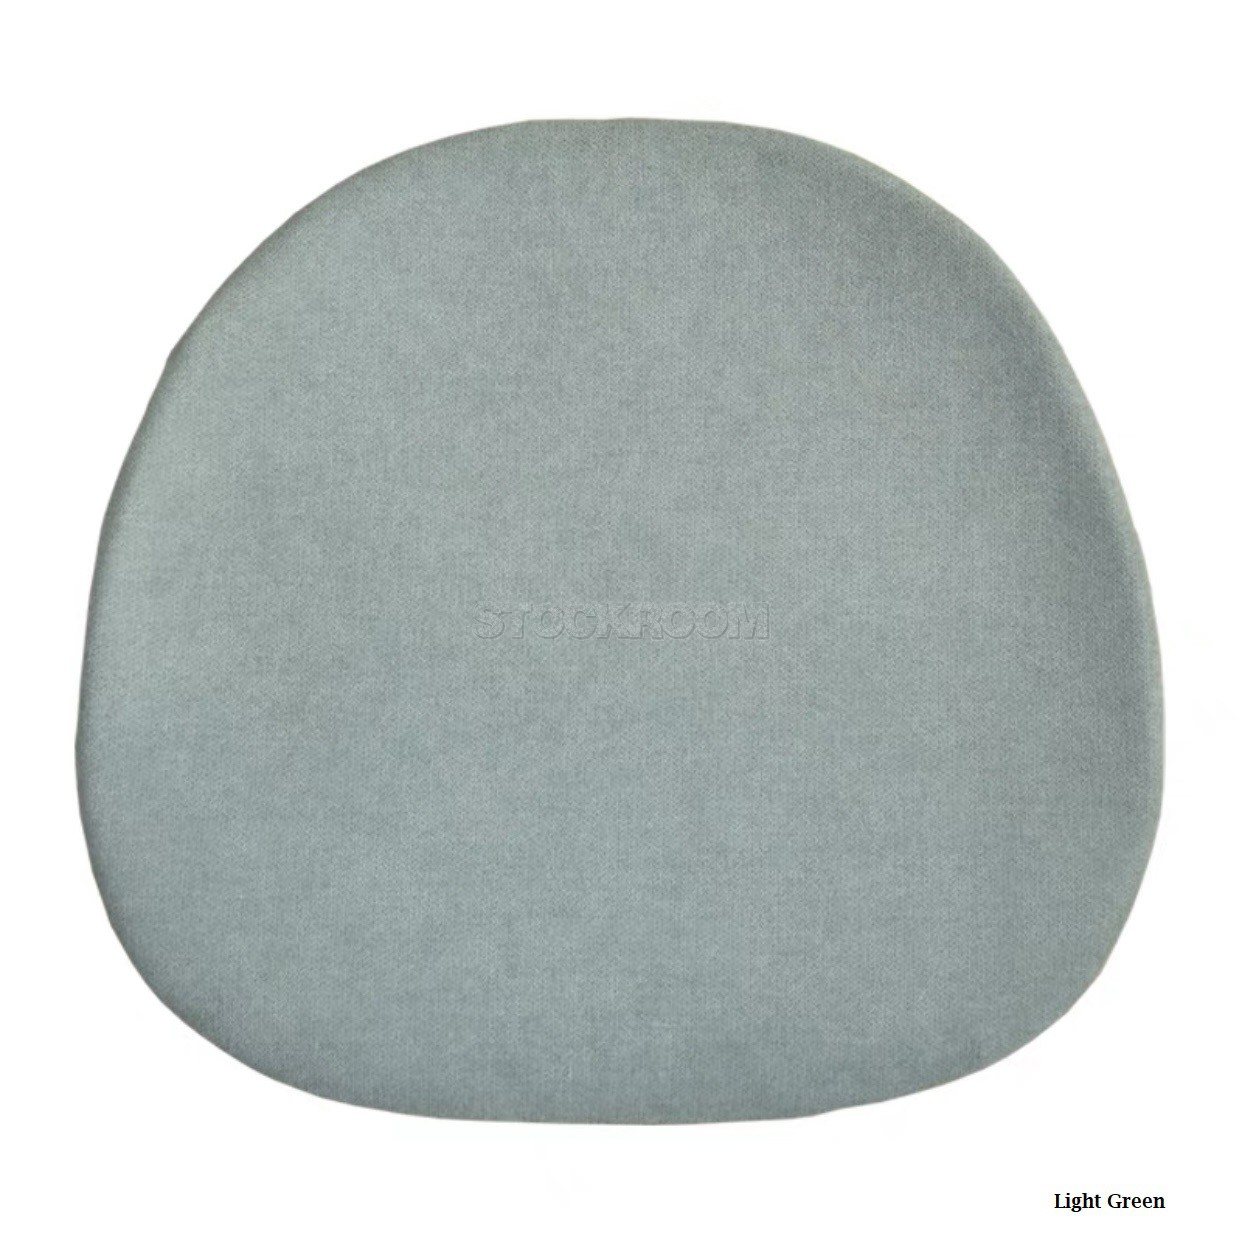 Eames Style Seat Pad